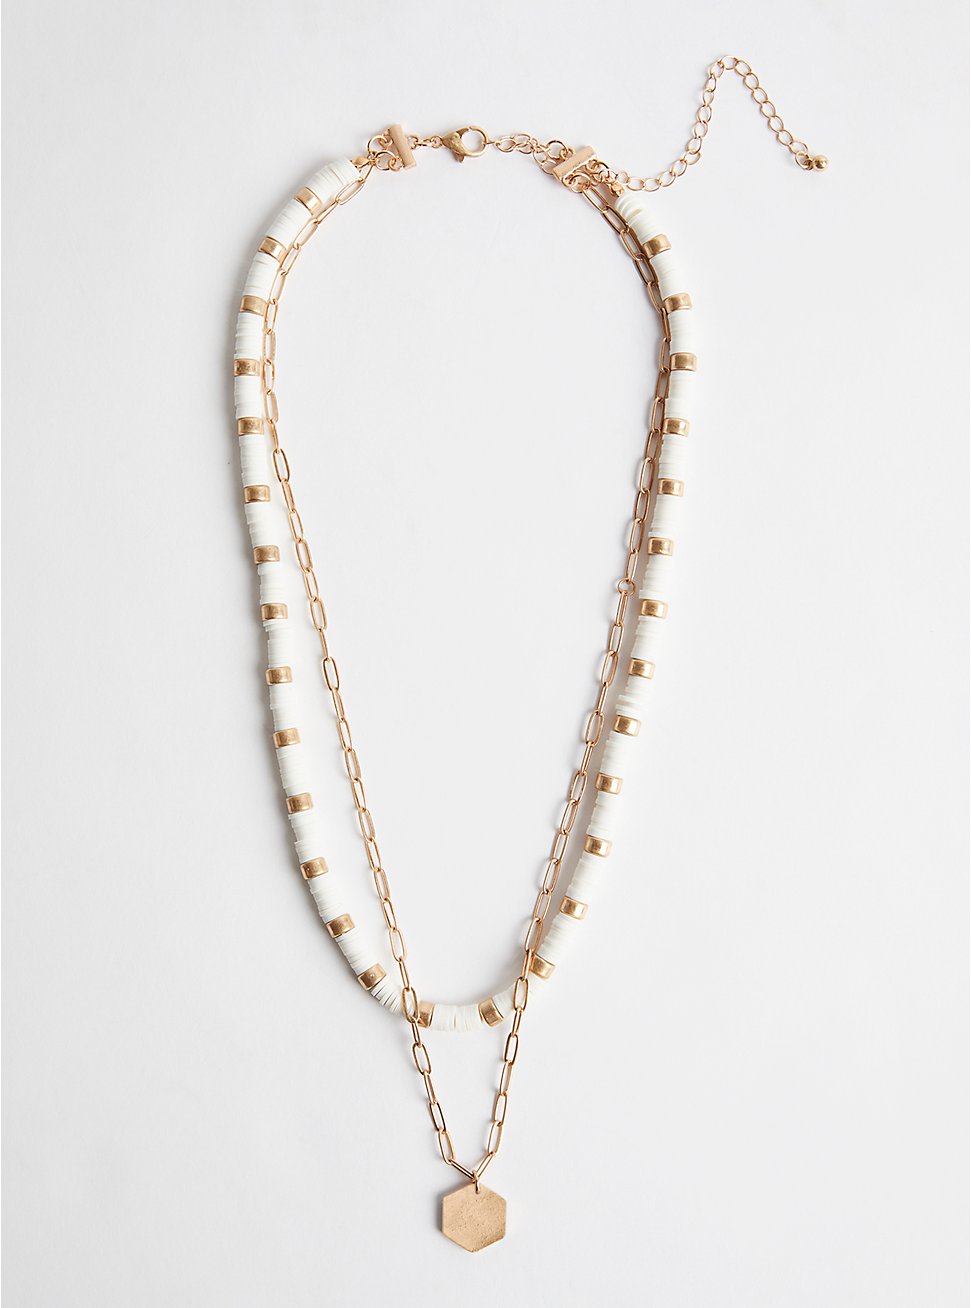 Layered Necklace with Beading - Gold Tone & White, , hi-res